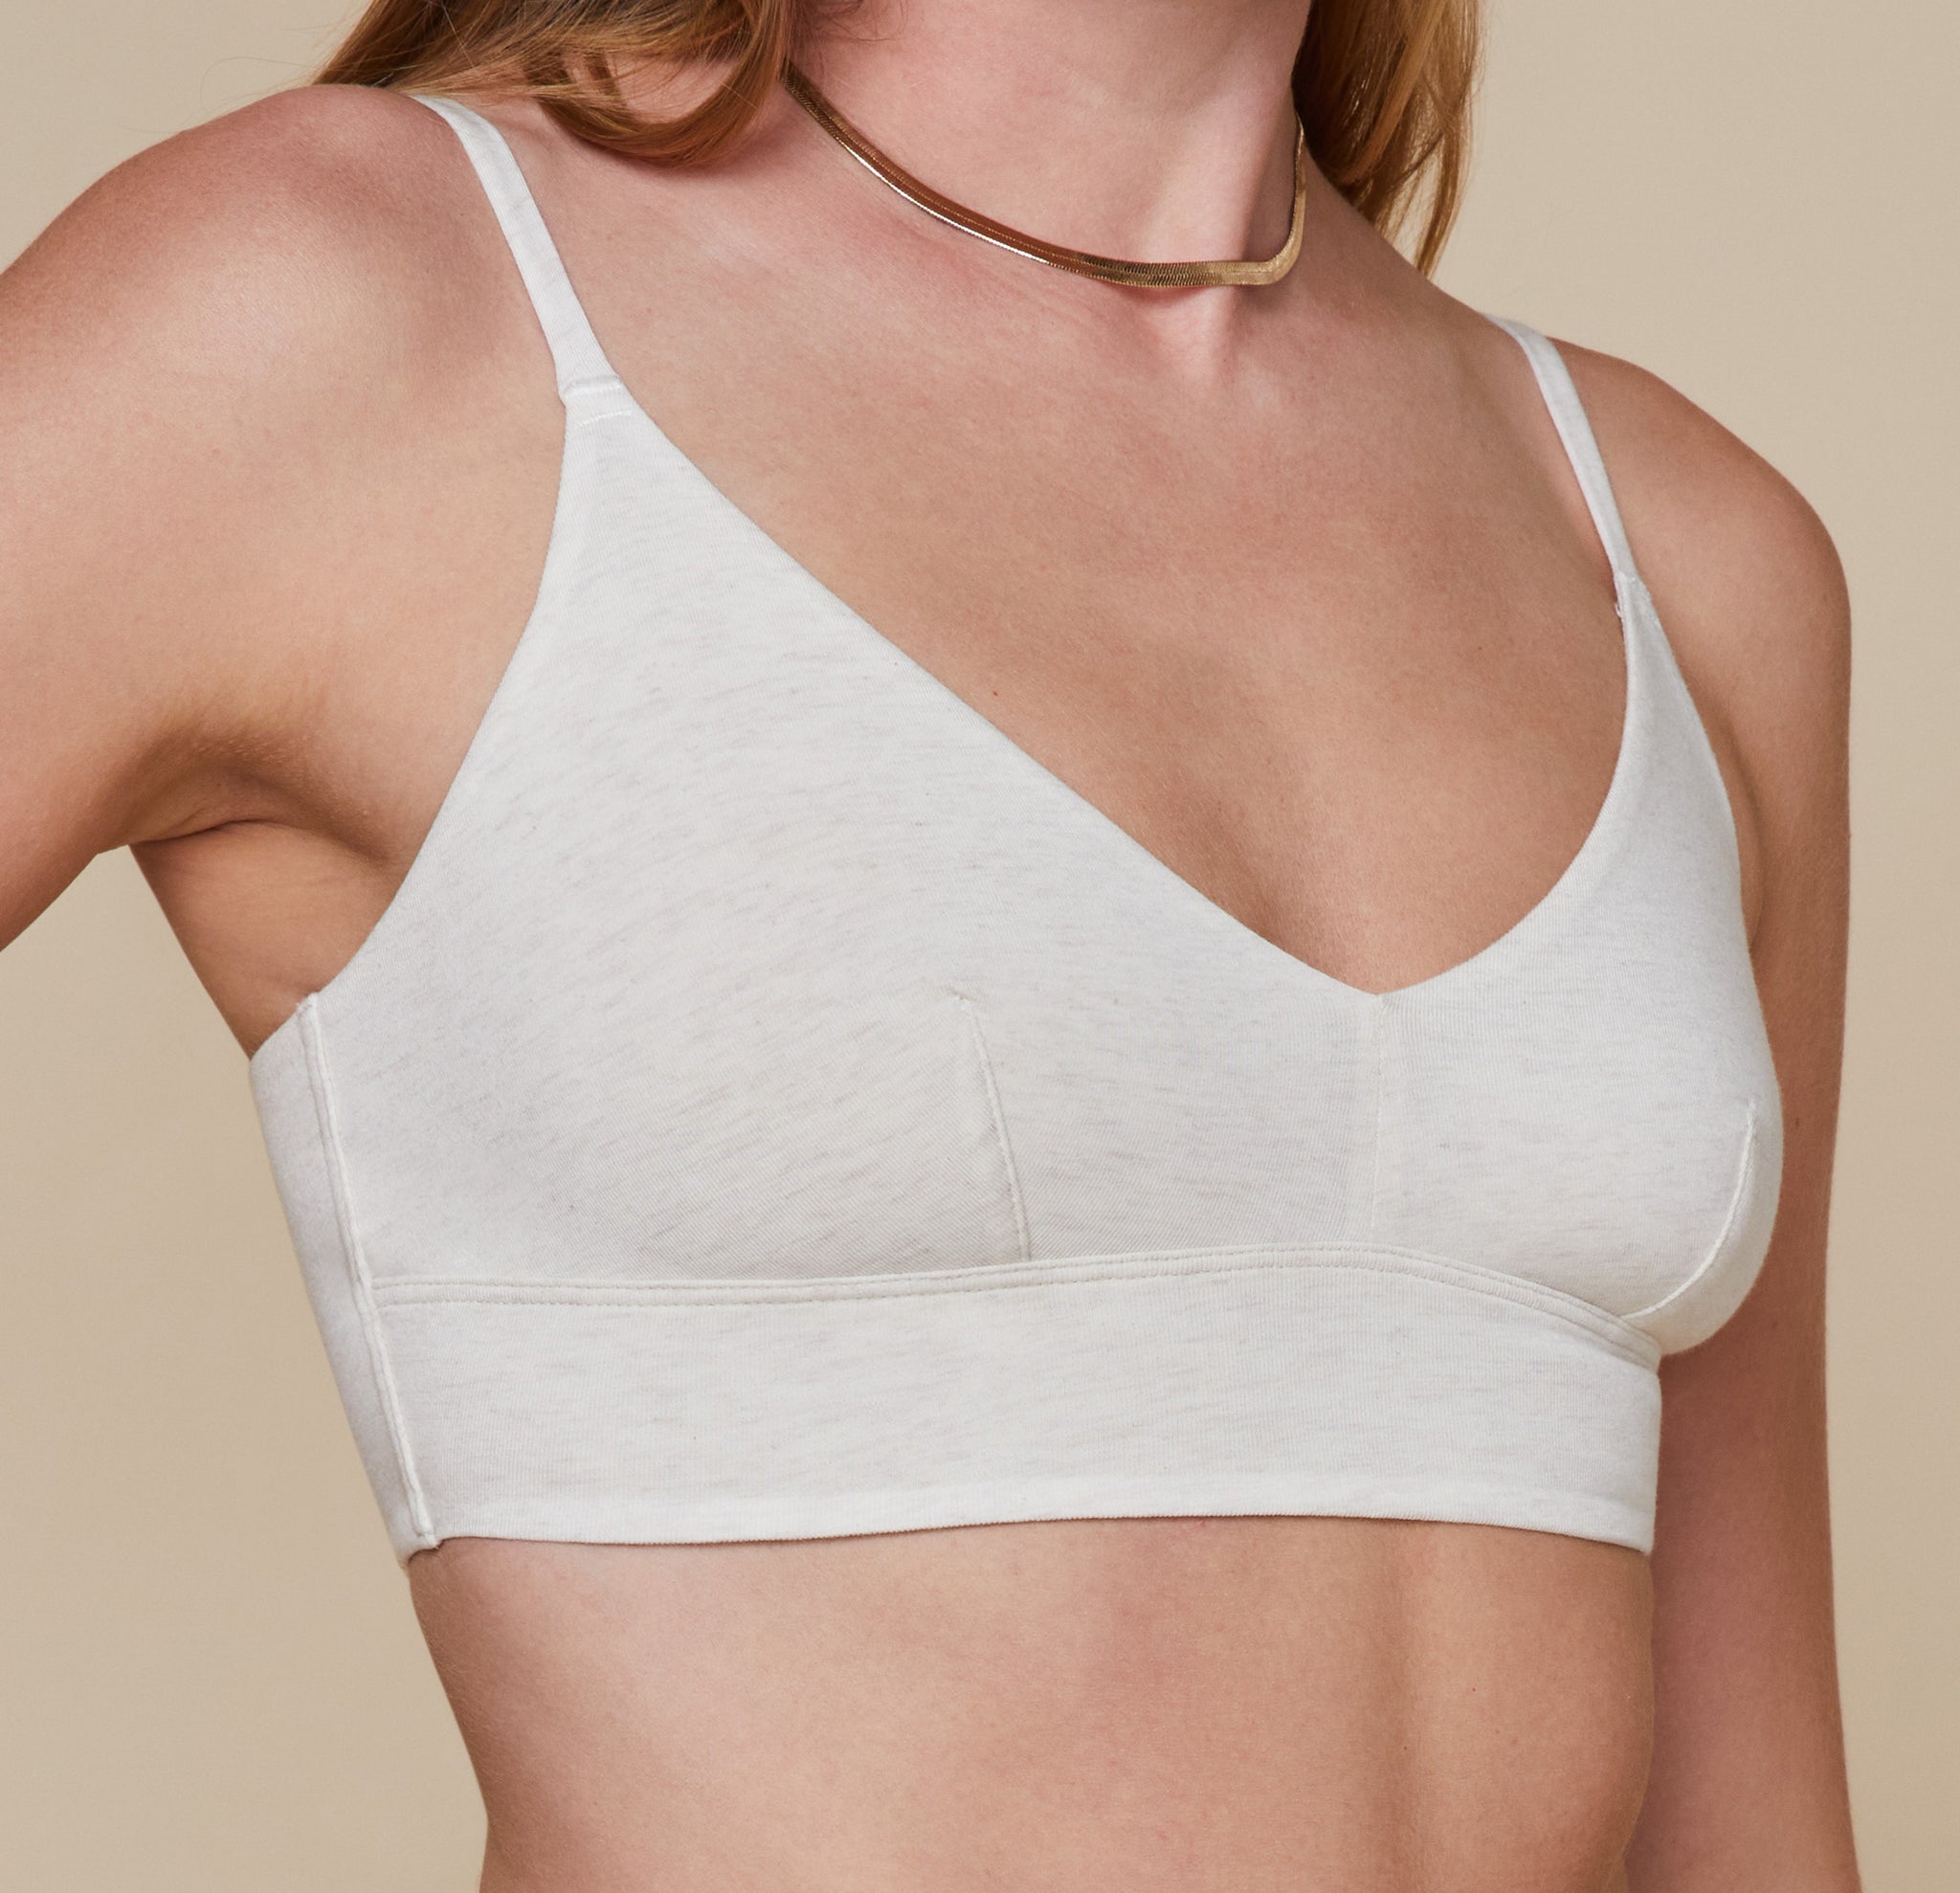 butwhatshouldiwear wears the Cotton Triangle Bralette and Cotton